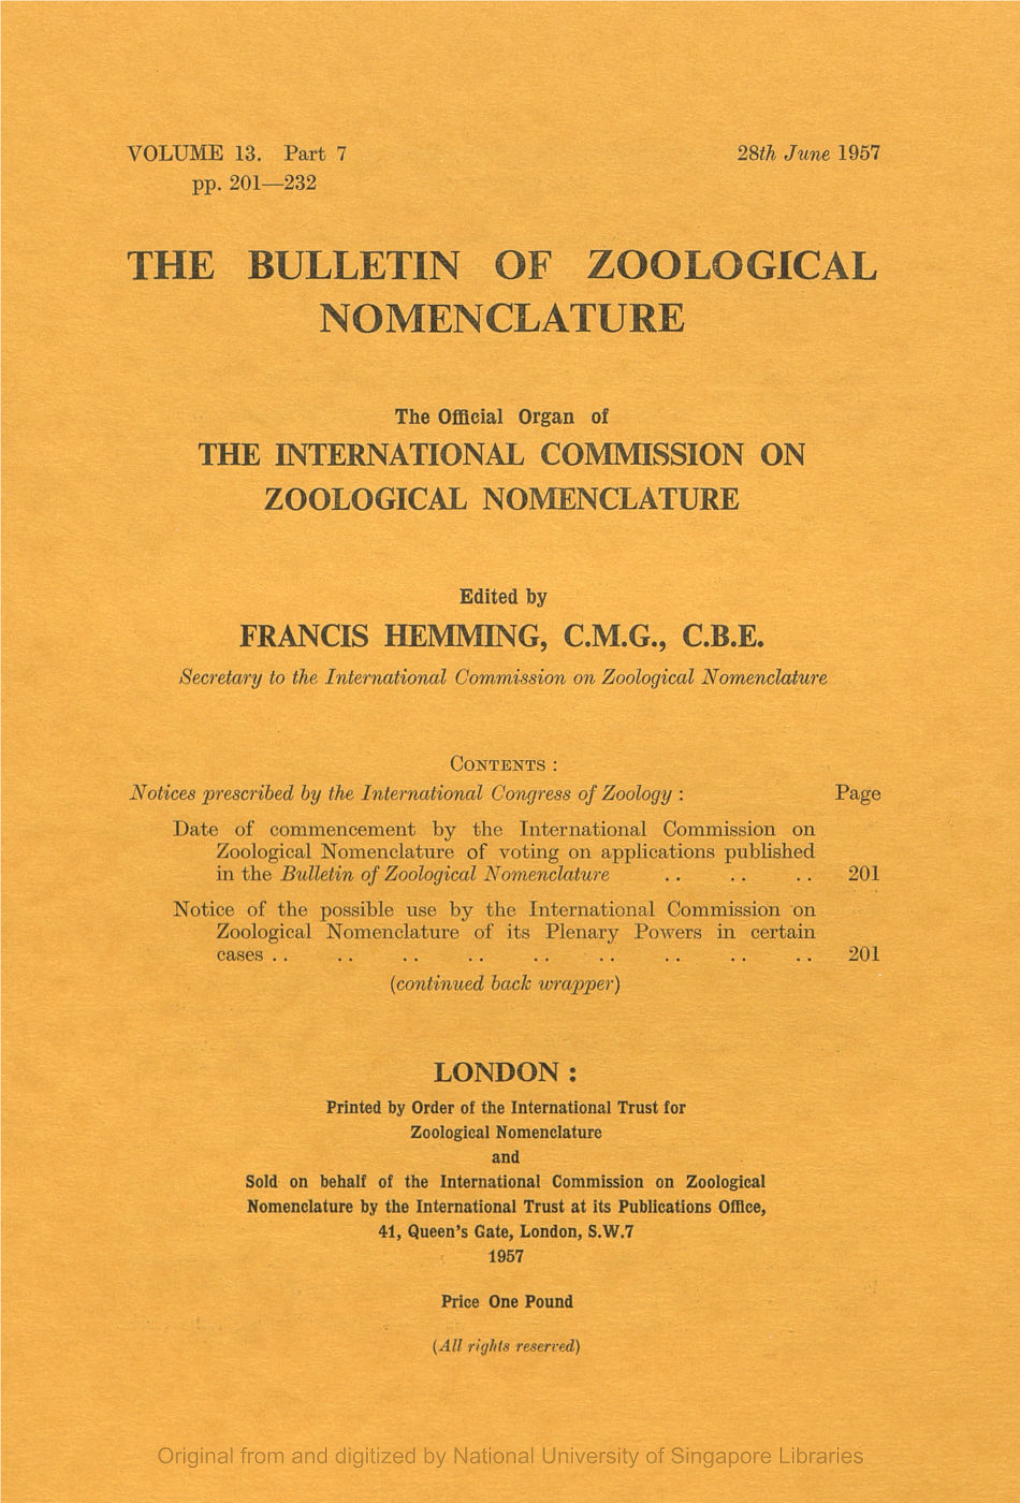 The Bulletin of Zoological Nomenclature. Vol 13, Part 7